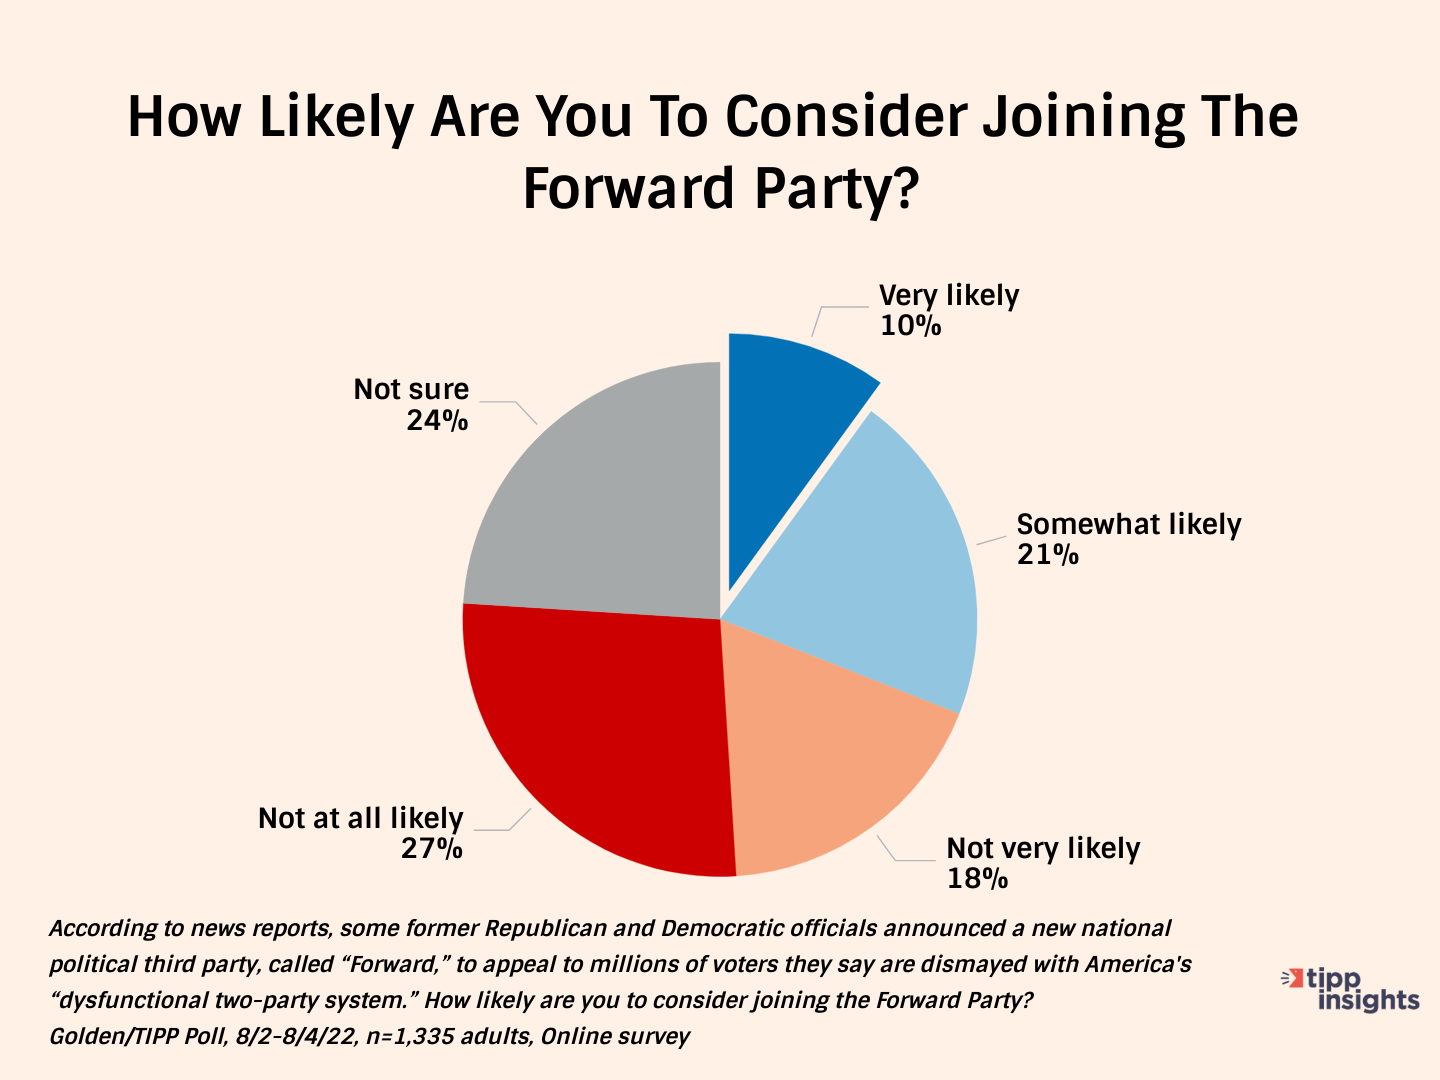 Golden/TIPP Poll results 8/2-8/4/22 - How likely are Americans to consider joining the forward party?